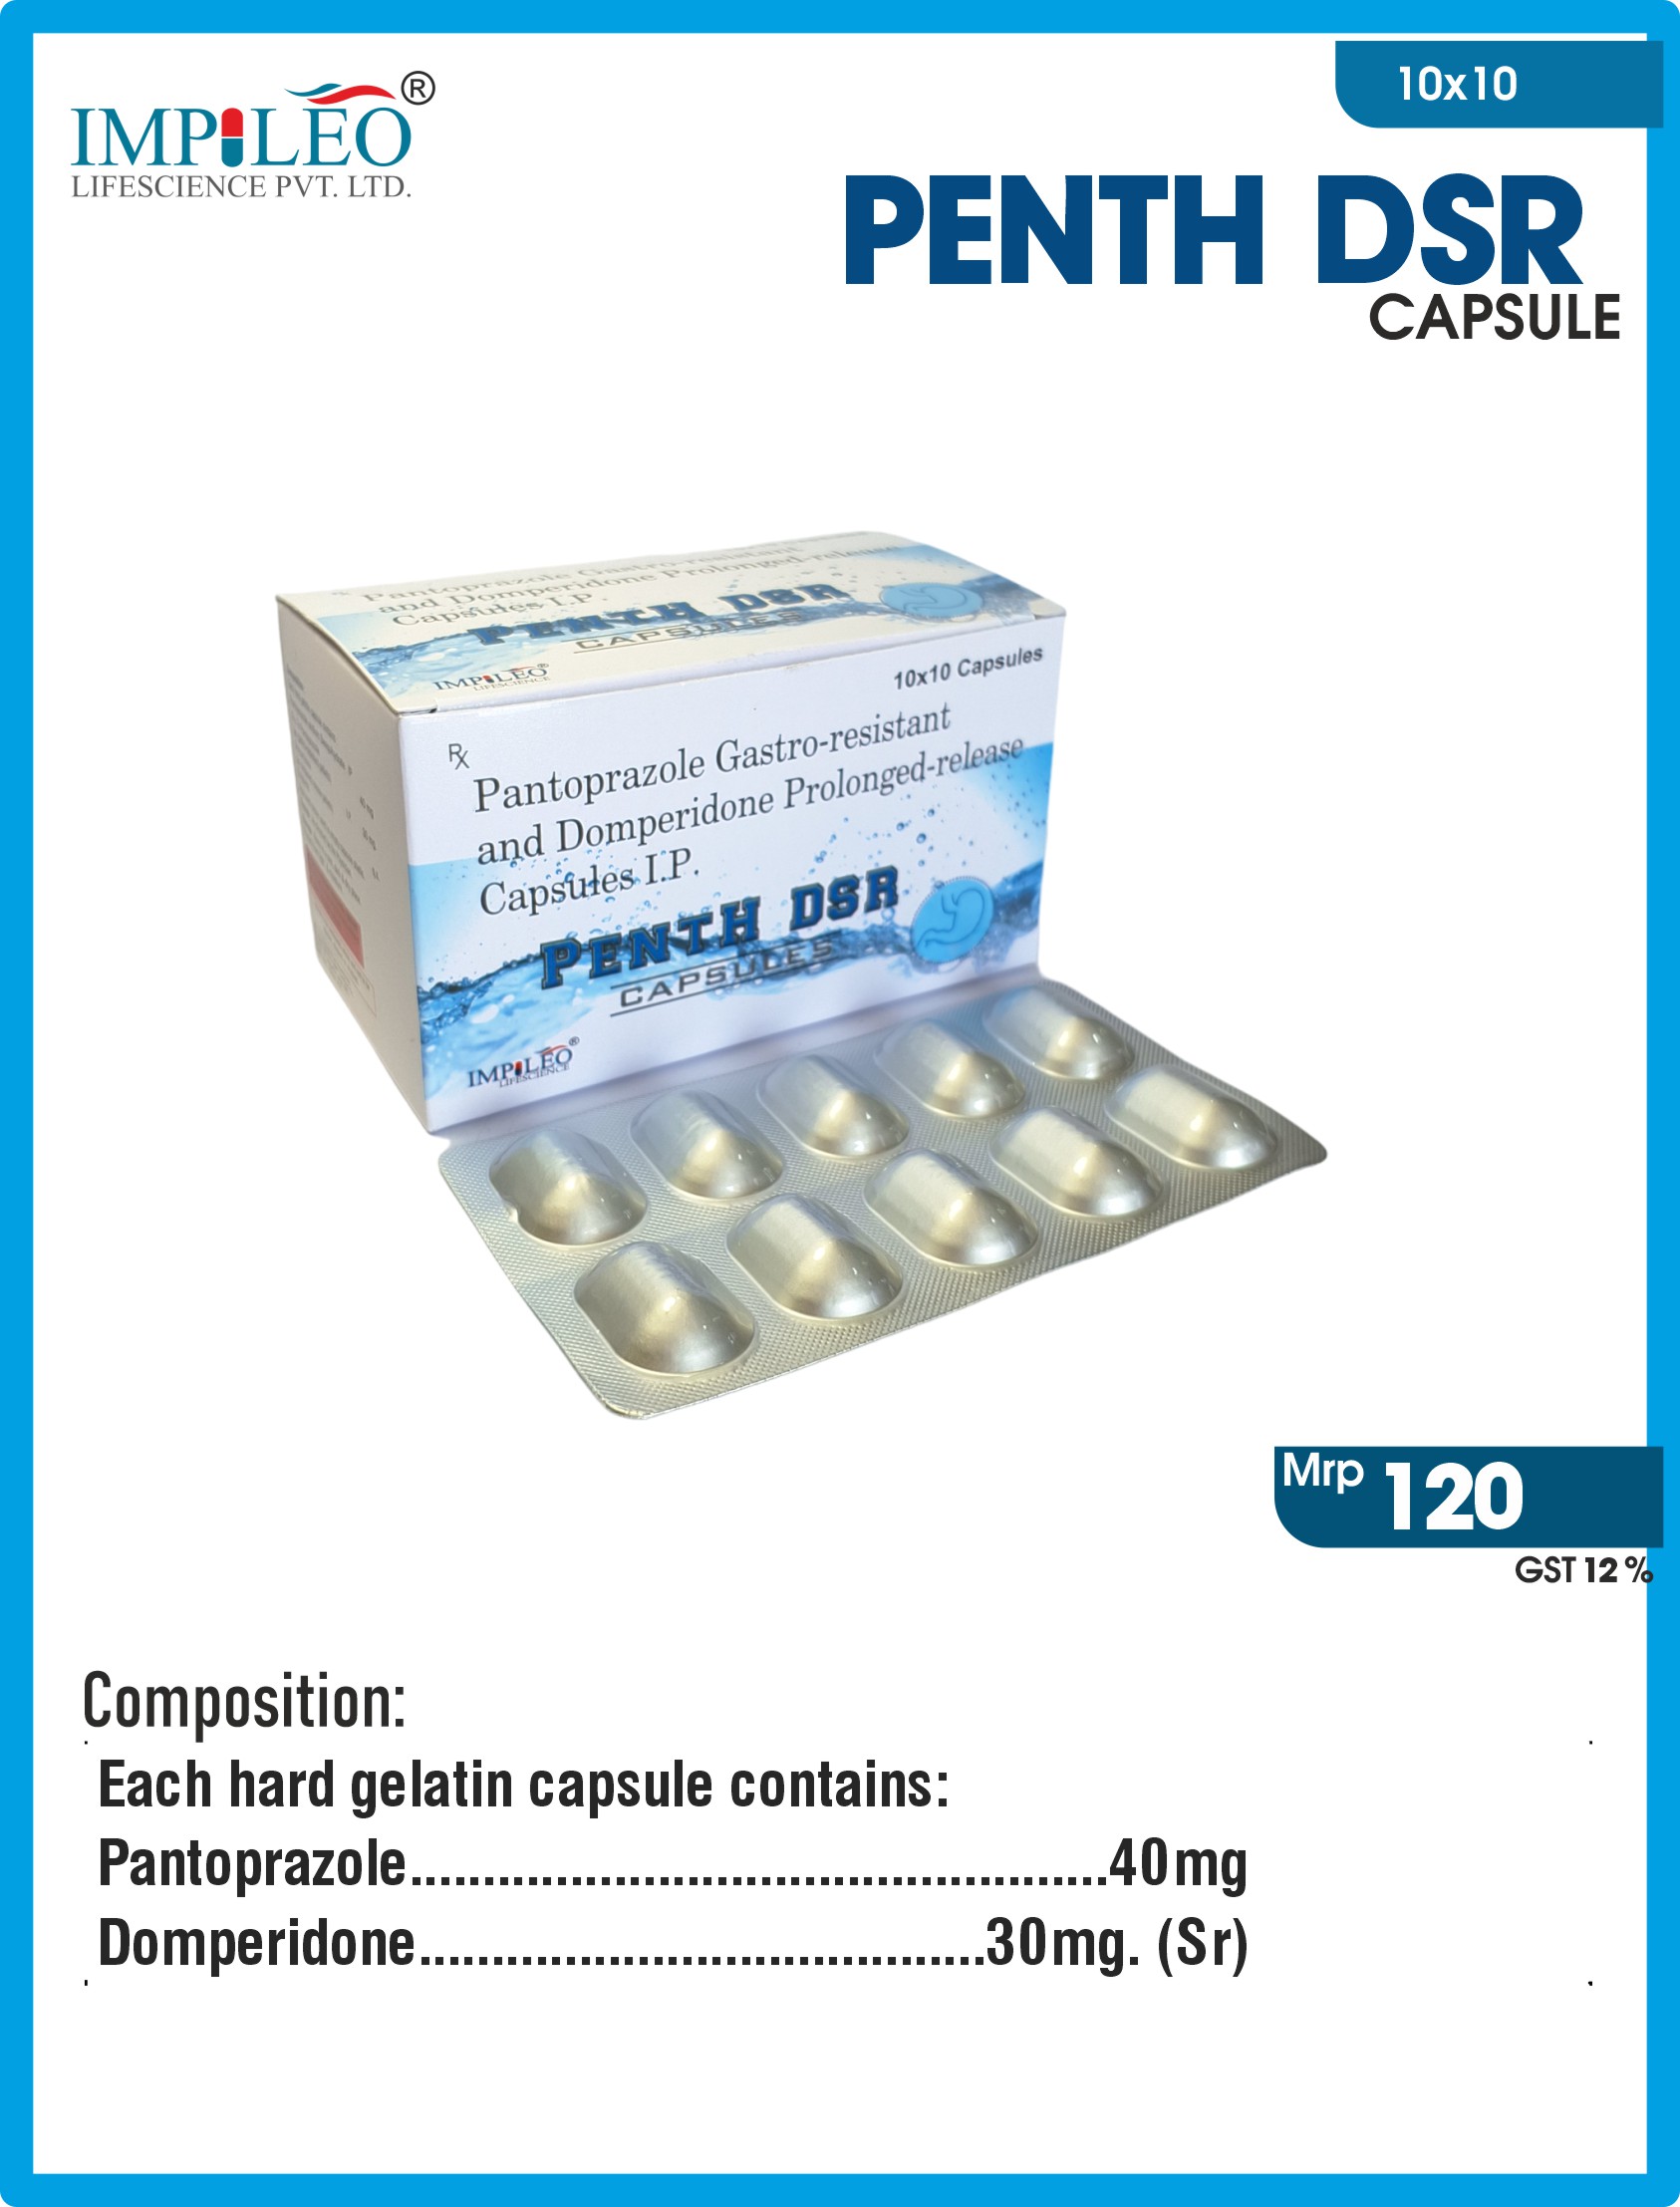 Unlock Your Potential: Join the PCD Pharma Franchise in Panchkula with PENTH DSR Capsules